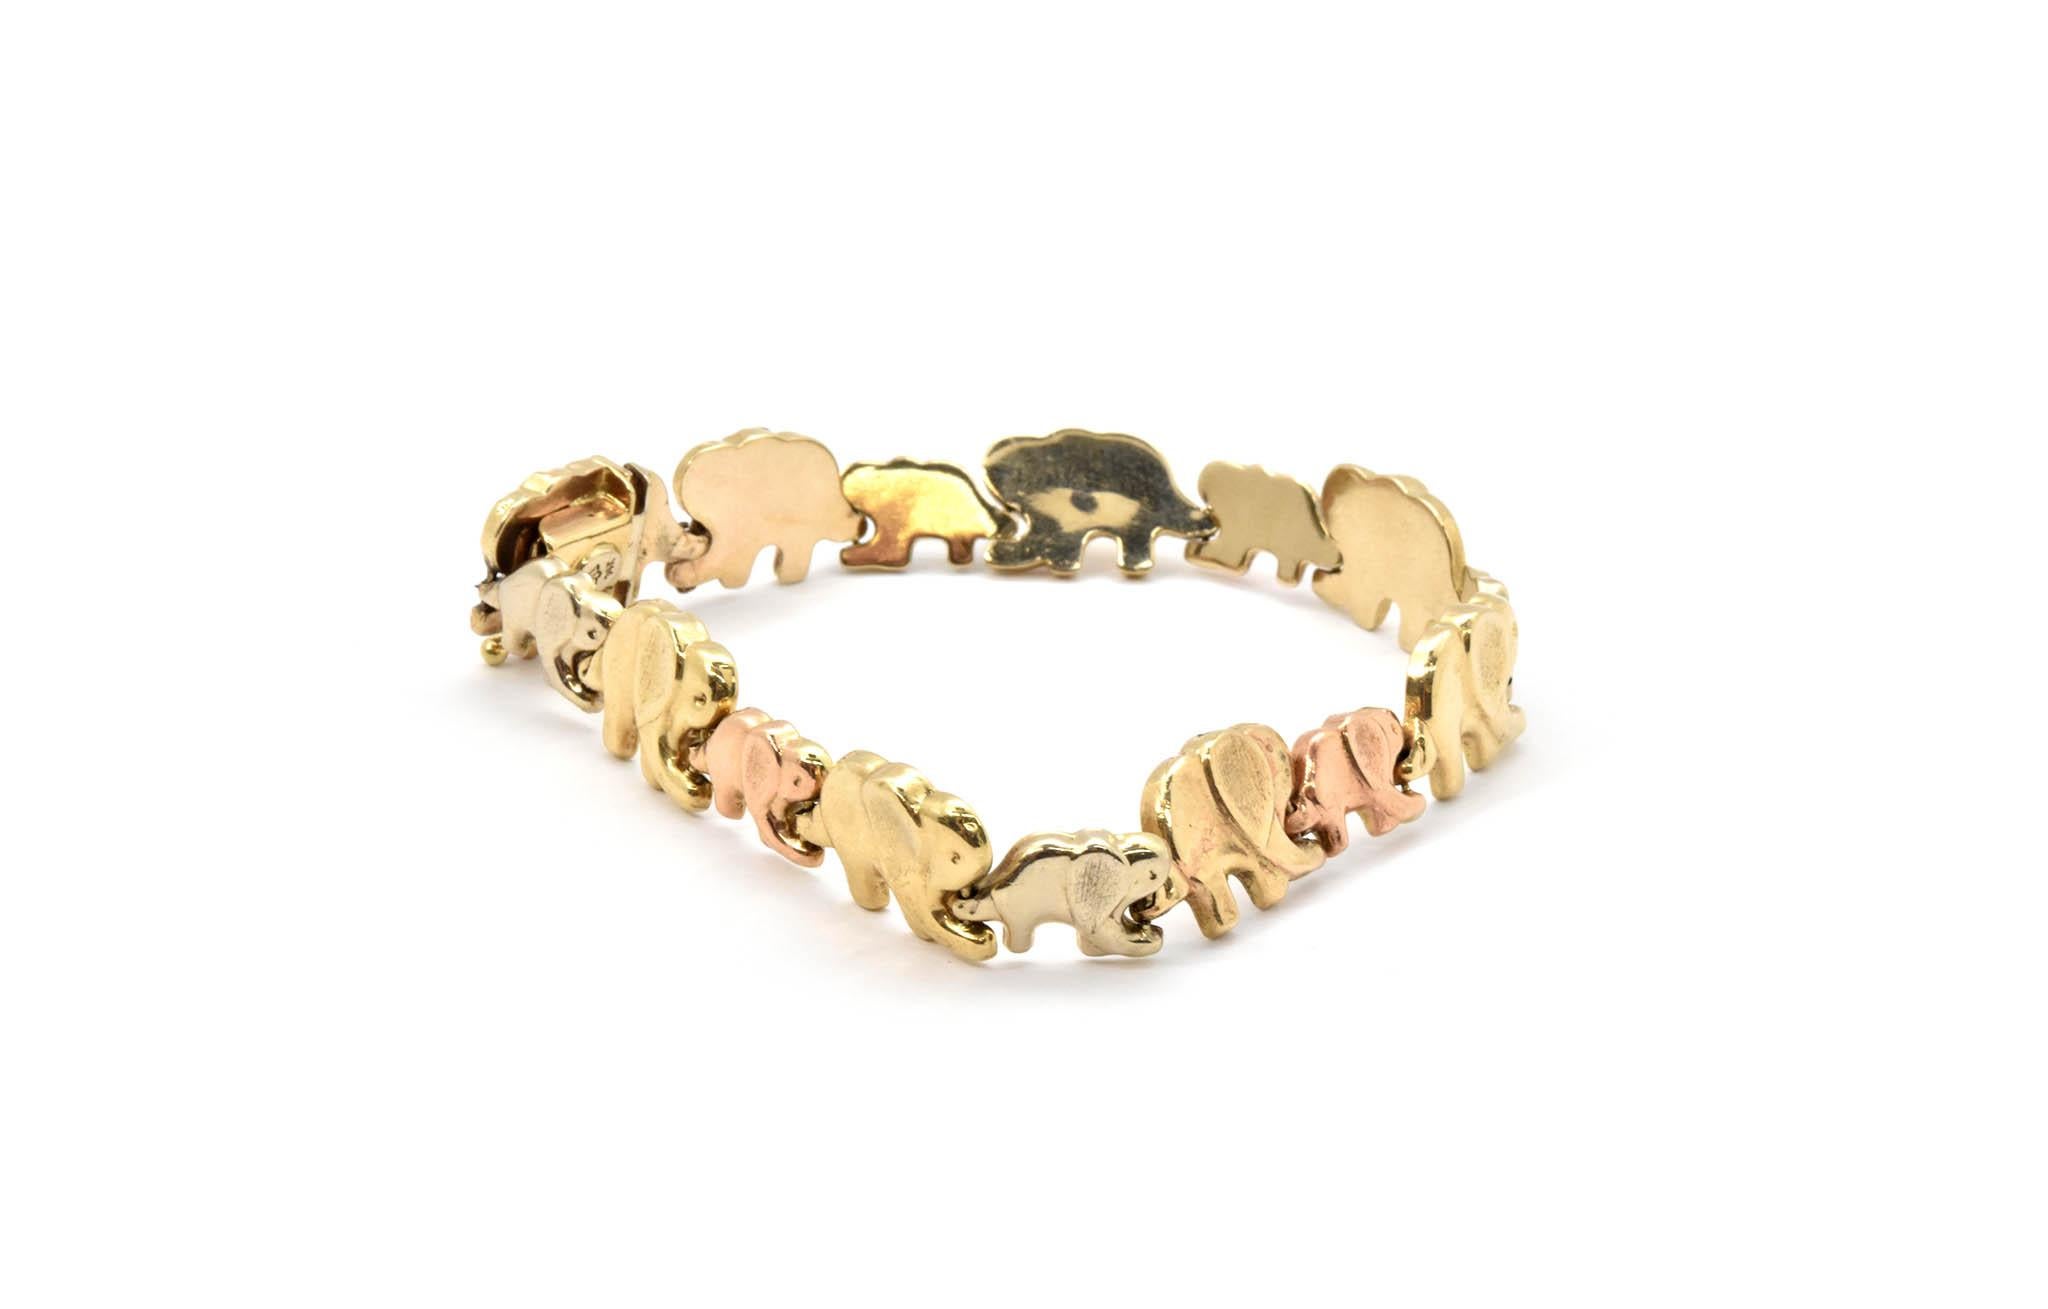 Elephants on parade!  This is a 14k tri-color gold bracelet made with elephant links lined up trunk to tail. The elephant bracelet measures 7” inches long. The large elephants are in yellow gold and measure 10.85mm wide. The small elephants measure